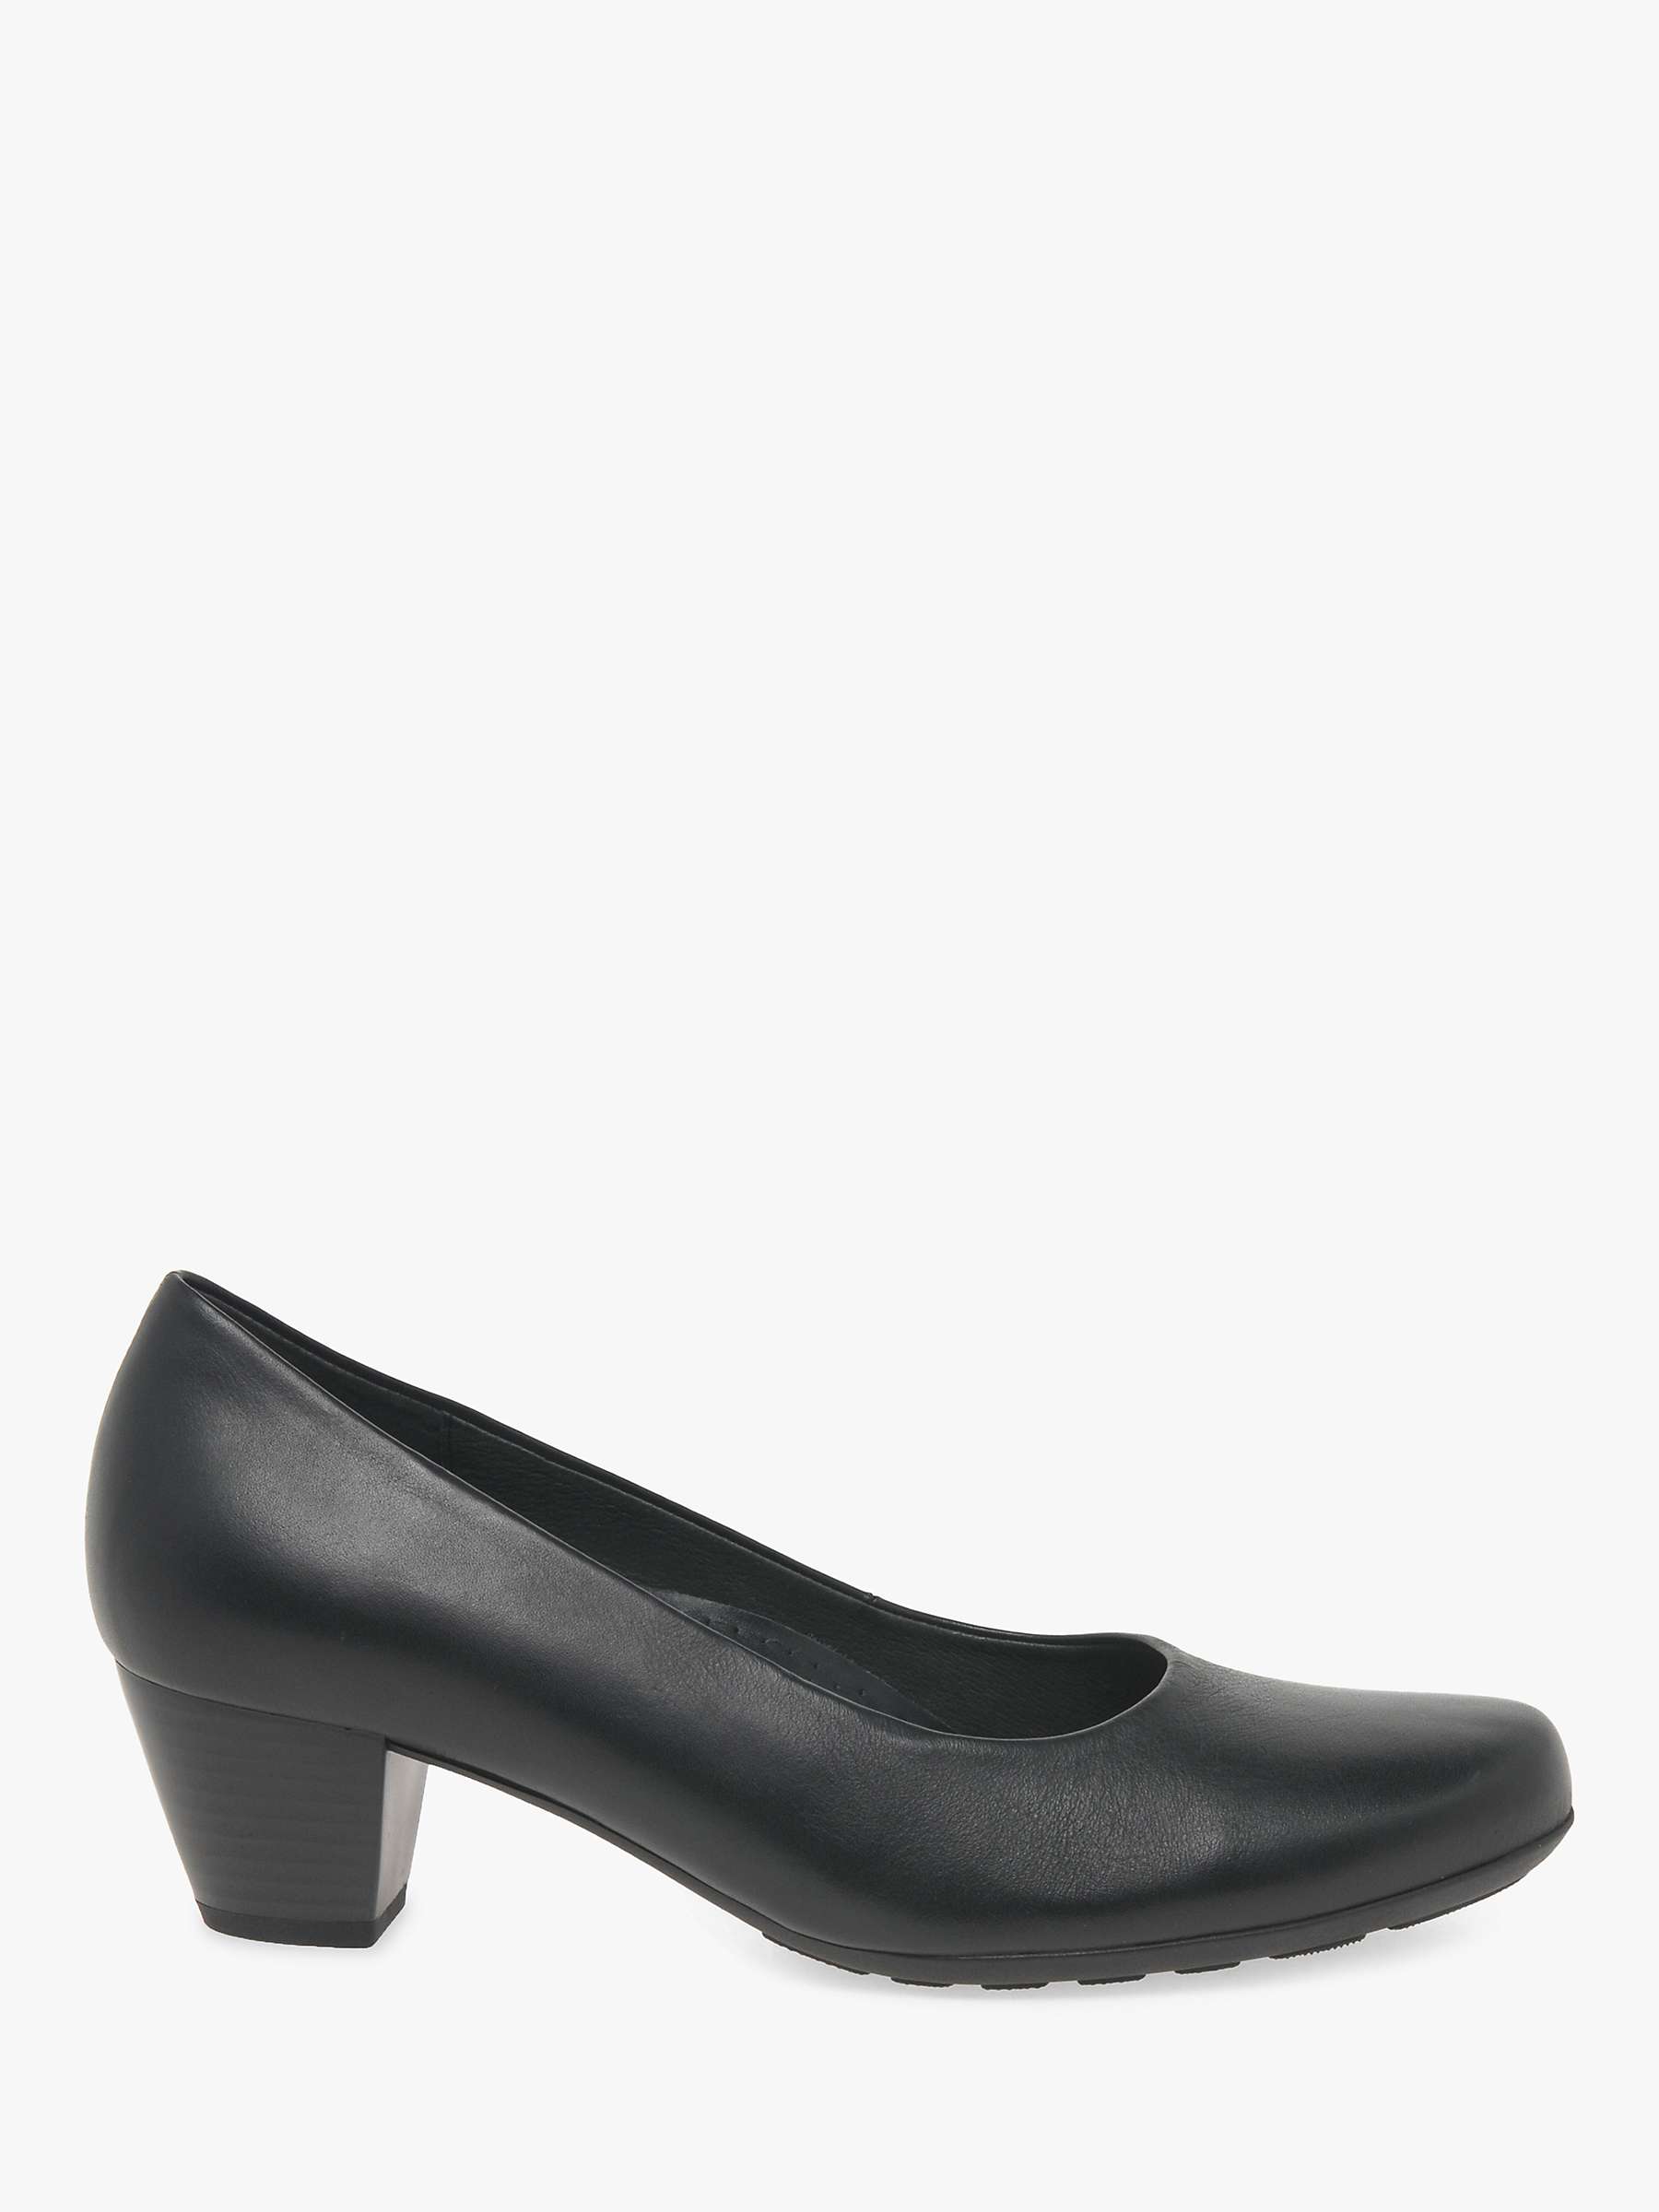 Buy Gabor Brambling Wide Fit Leather Court Shoes, Black Online at johnlewis.com